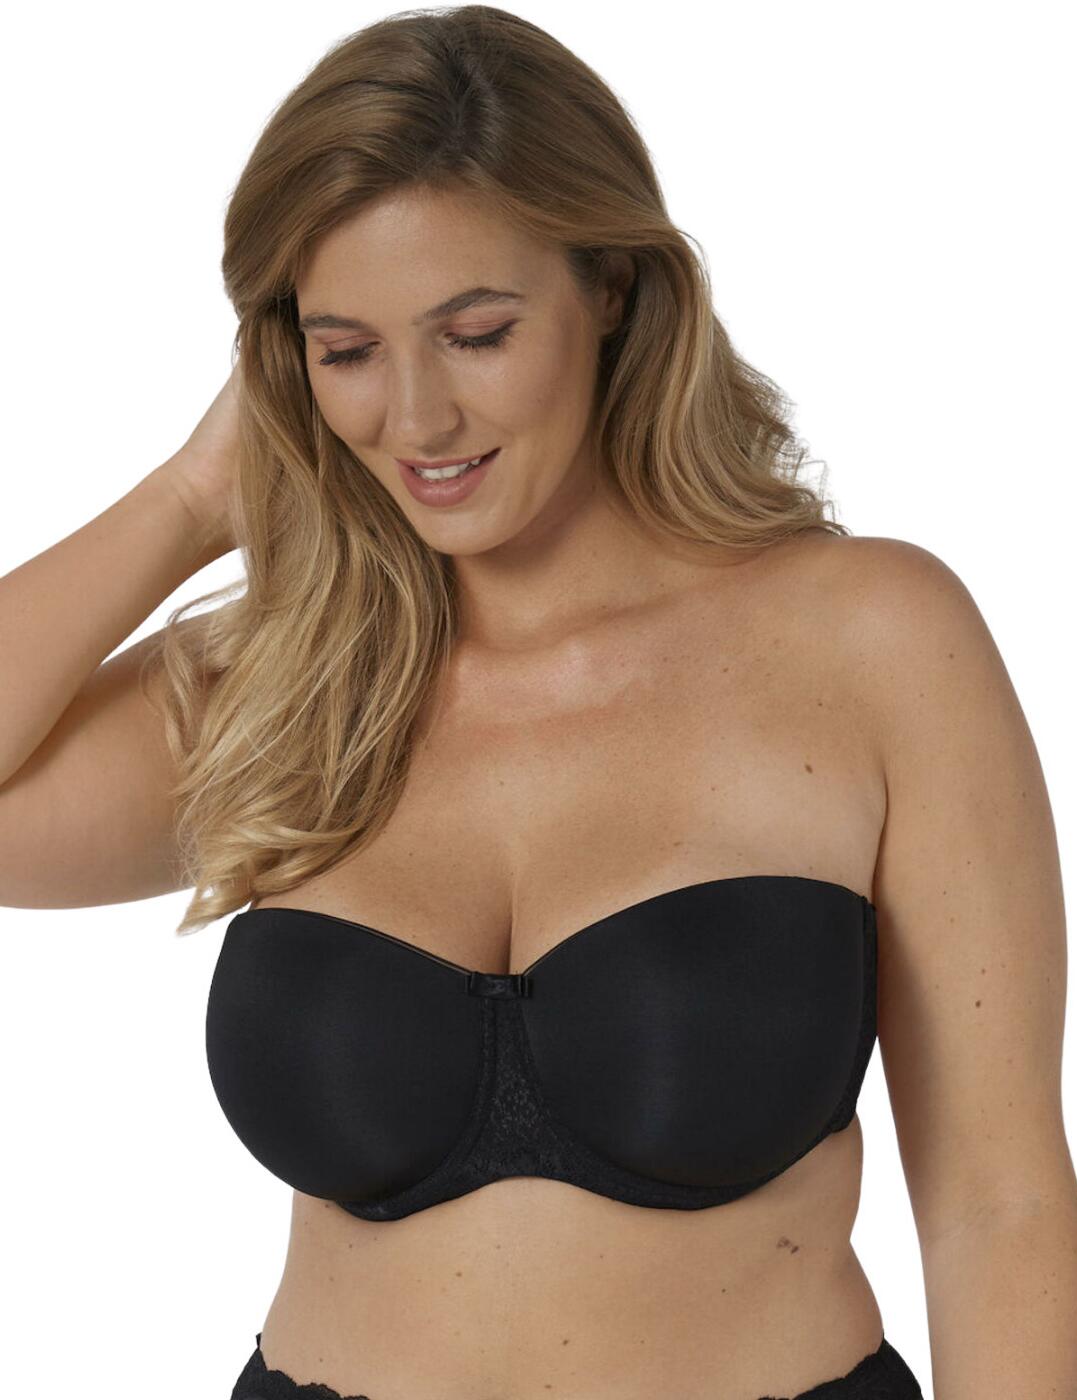  Triumph Beauty-Full Essential WDP Wired Detachable Strap Padded  Bra Black 40DD CS : Clothing, Shoes & Jewelry